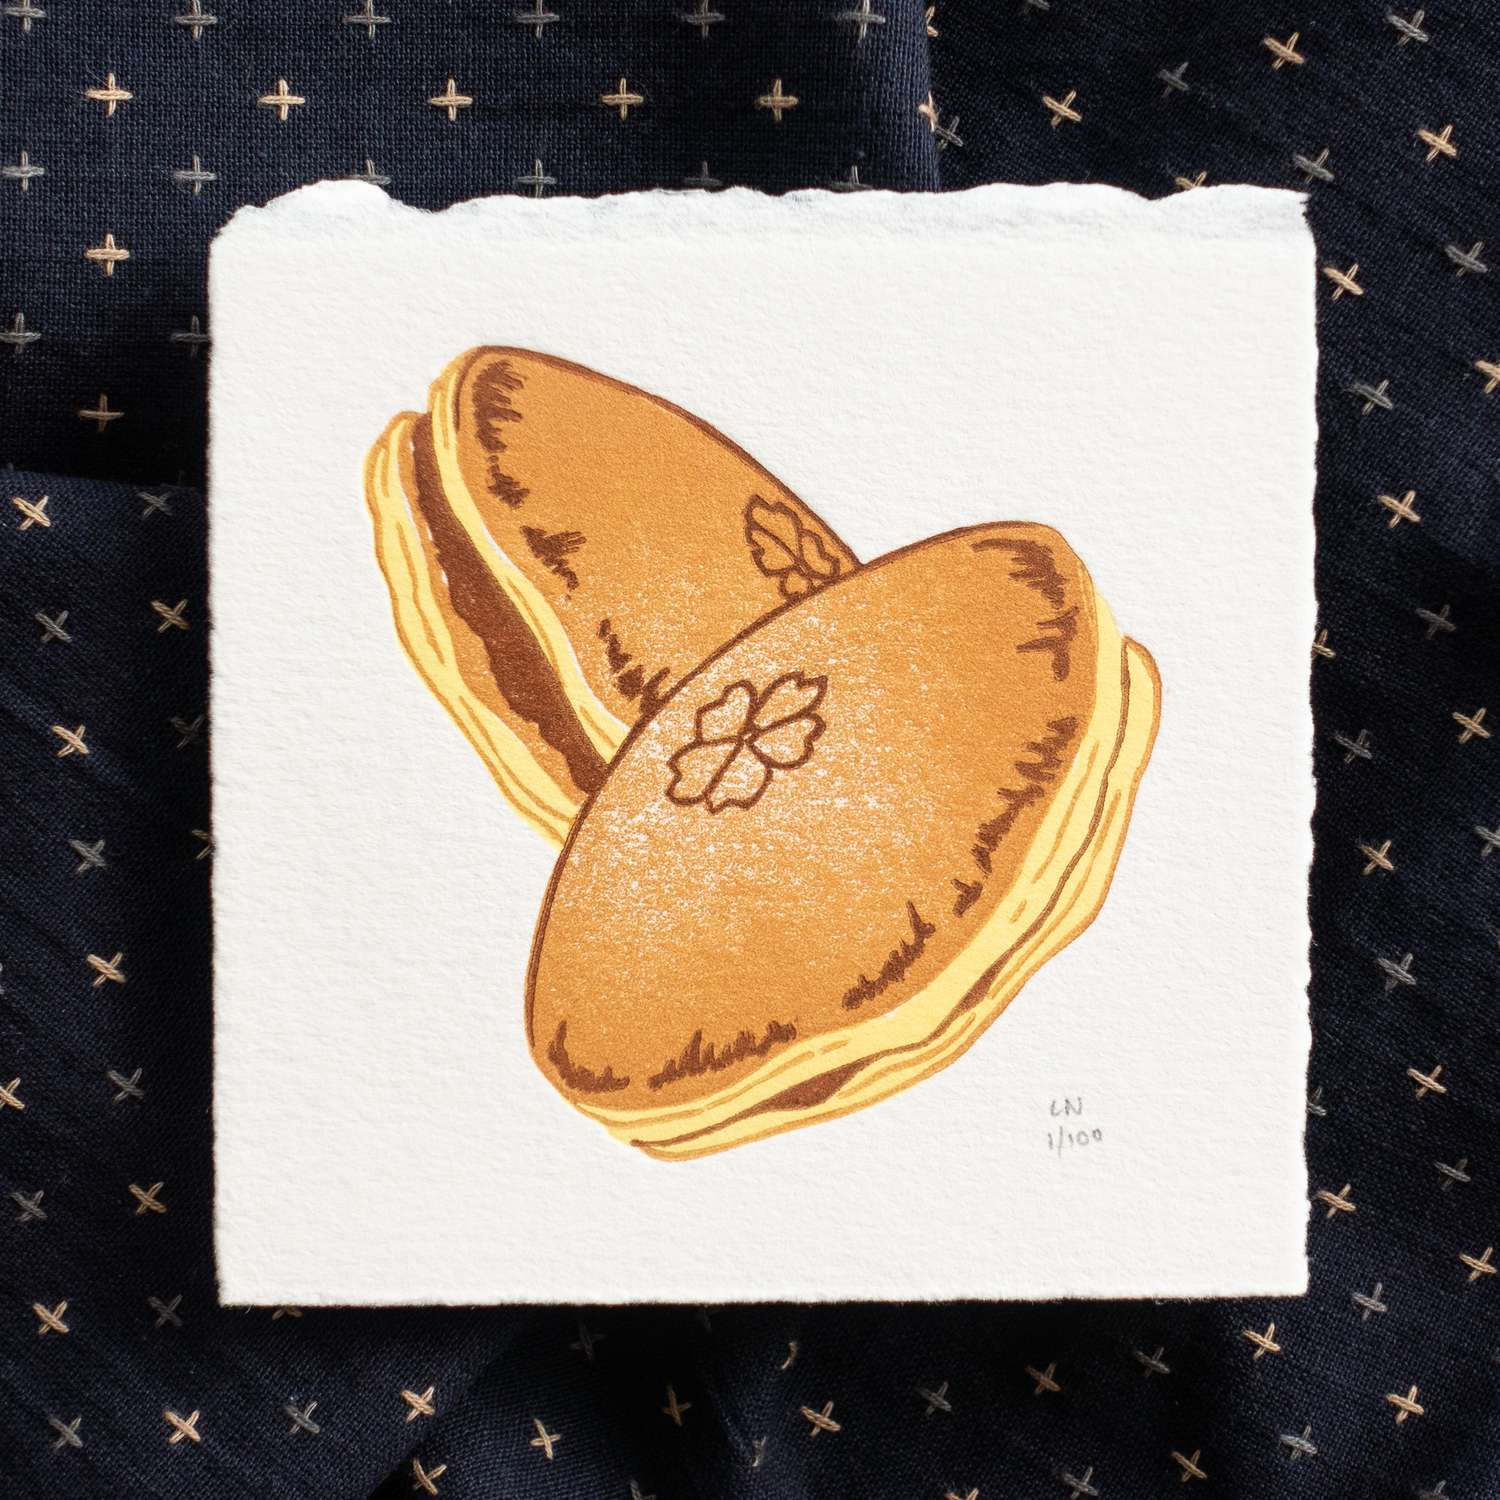 A square piece of paper depicting two overlapping dorayaki. Each dorayaki is printed in yellow, orange-brown, and dark brown, and are suspended in the air. The print sits on crumpled dark navy fabric with light-colored checks. The print is signed in the bottom right corner.